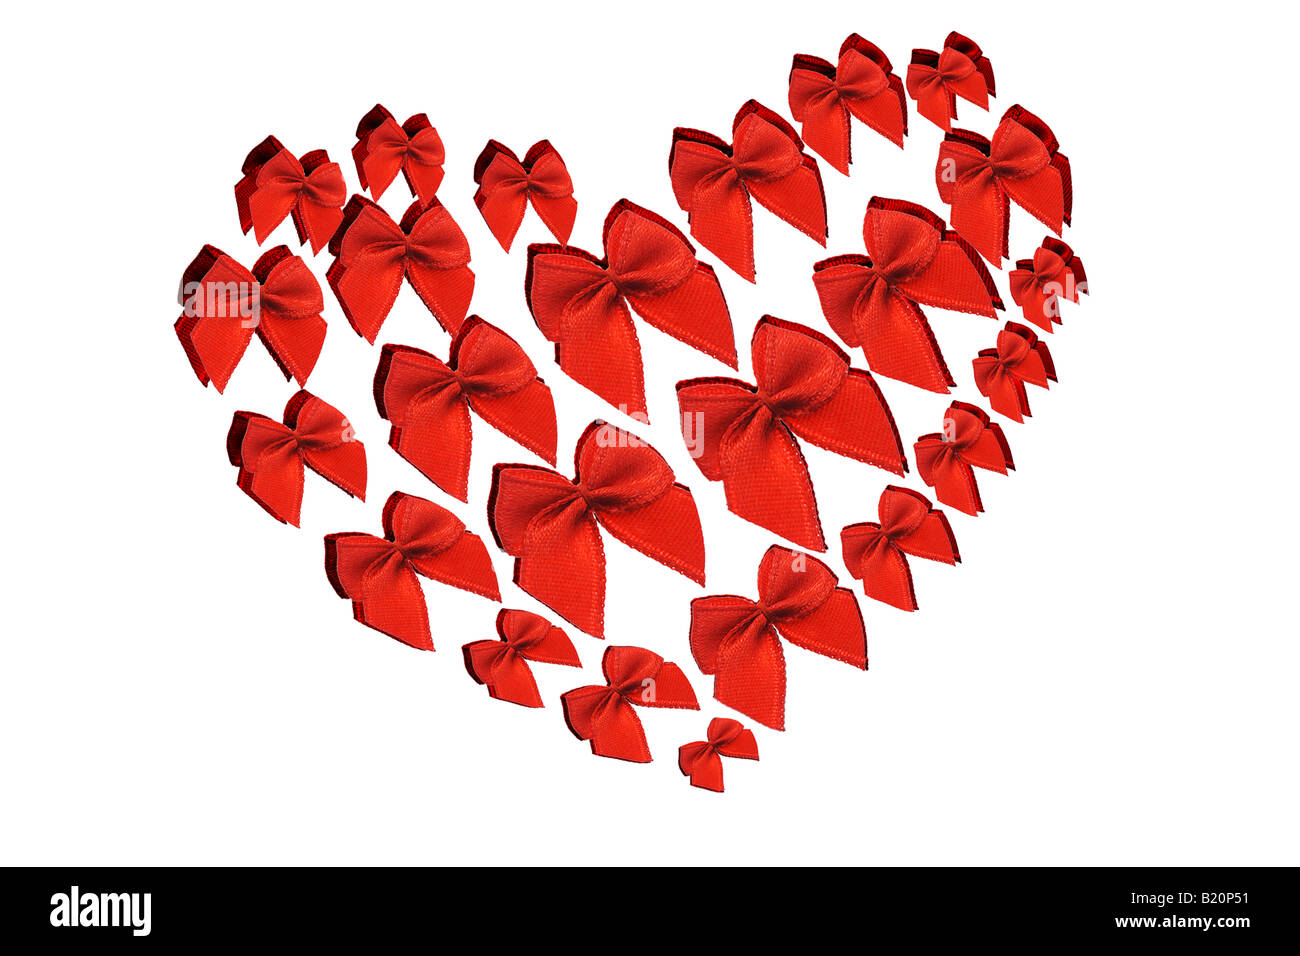 Red decorative bows arranged in heart shape symbol on white background Stock Photo